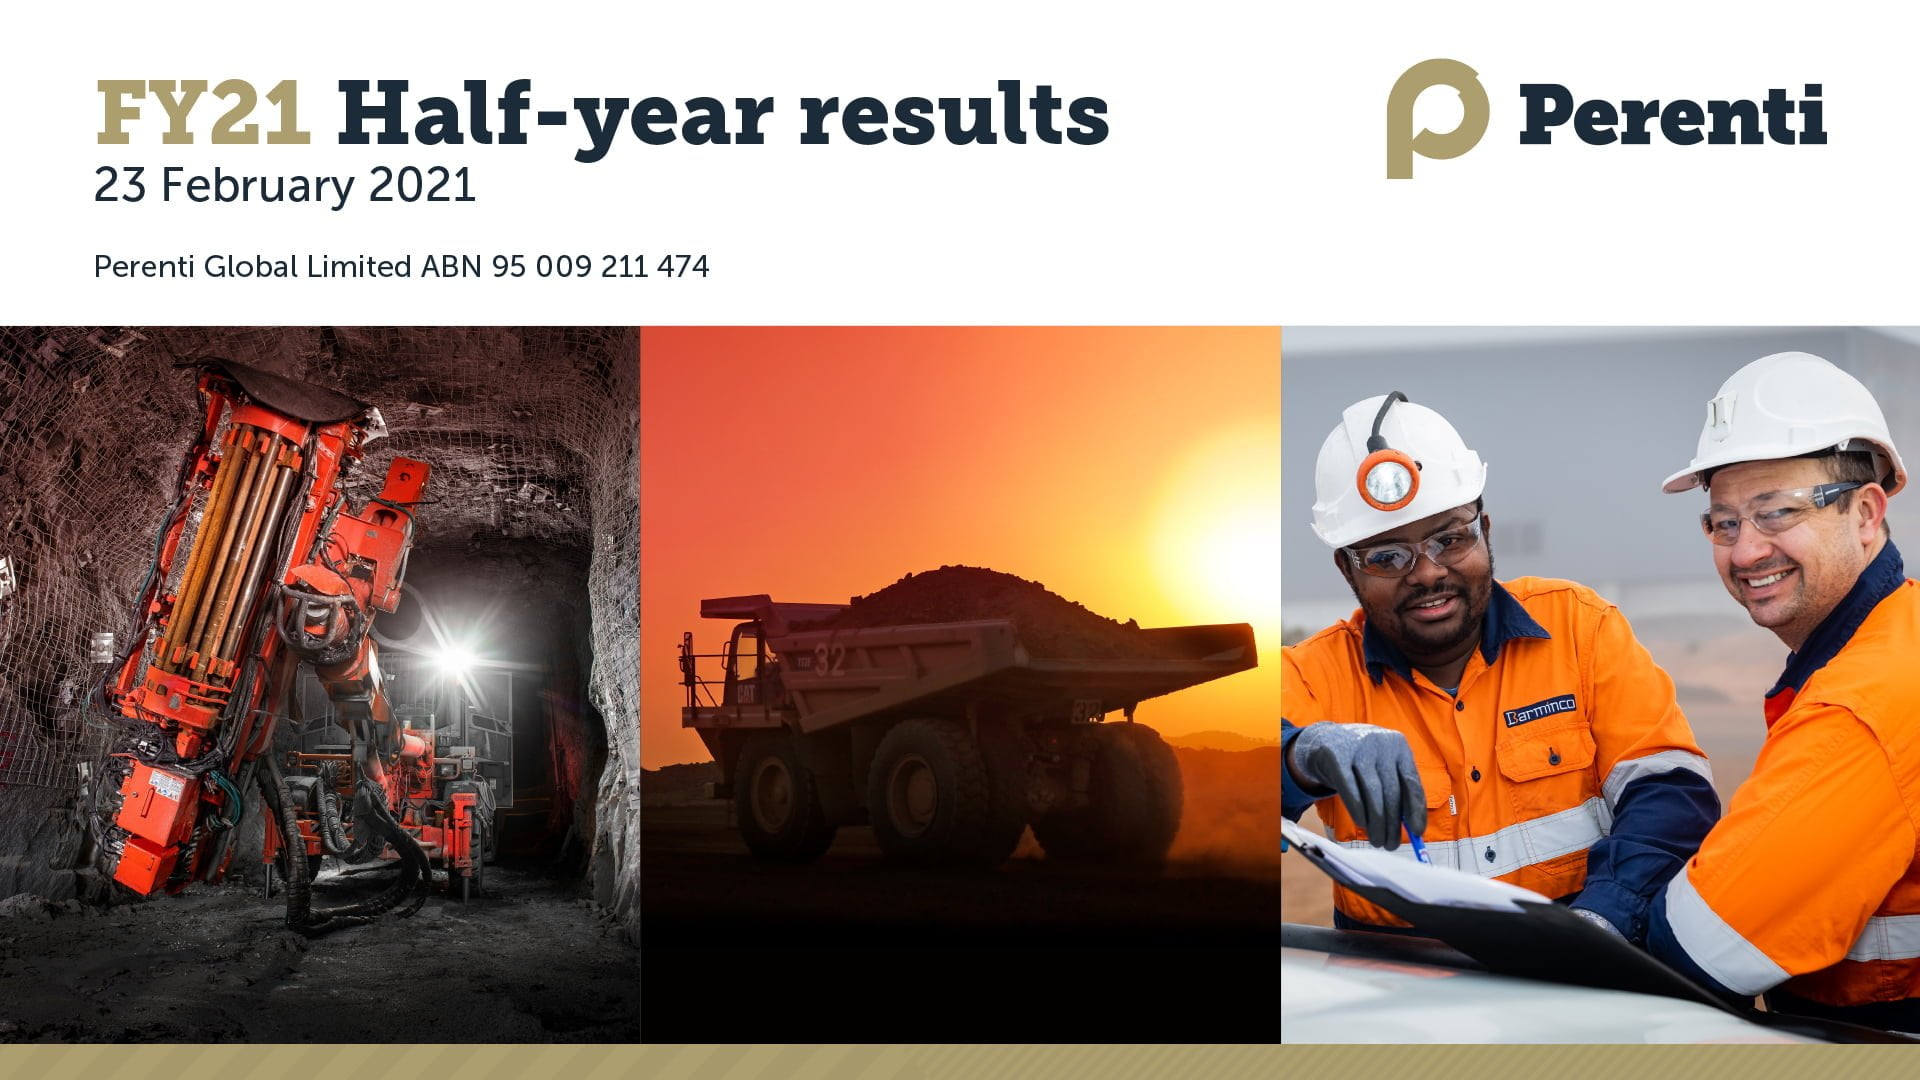 Disciplined strategy execution and strong Underground performance underpin Perenti’s 1H21 financial results